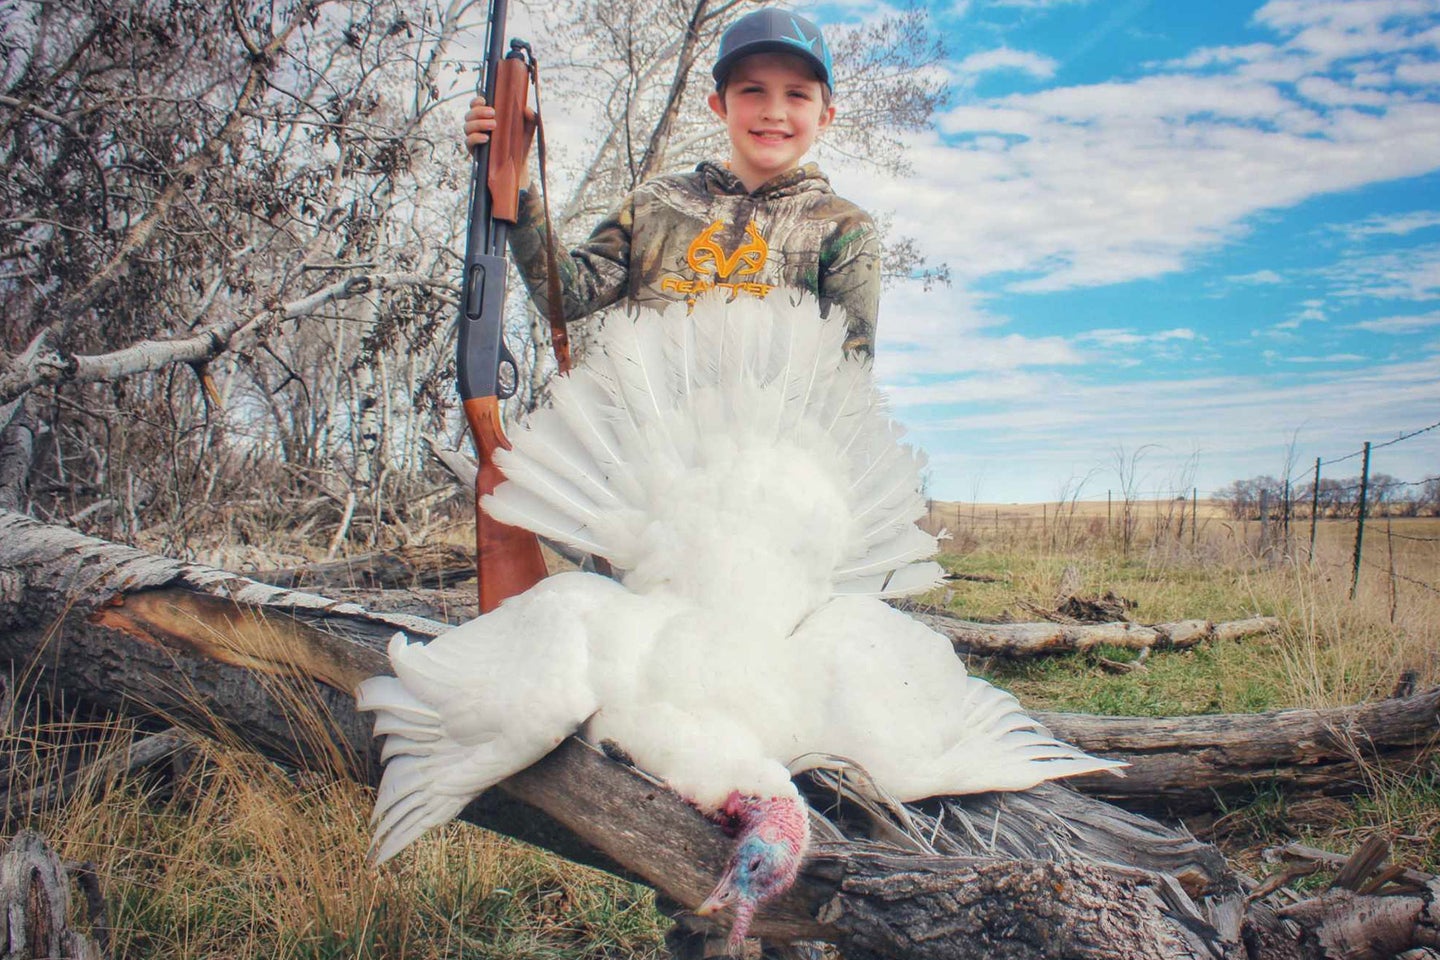 A young hunter poses with an all-white turkey after a successful hunting with his father.